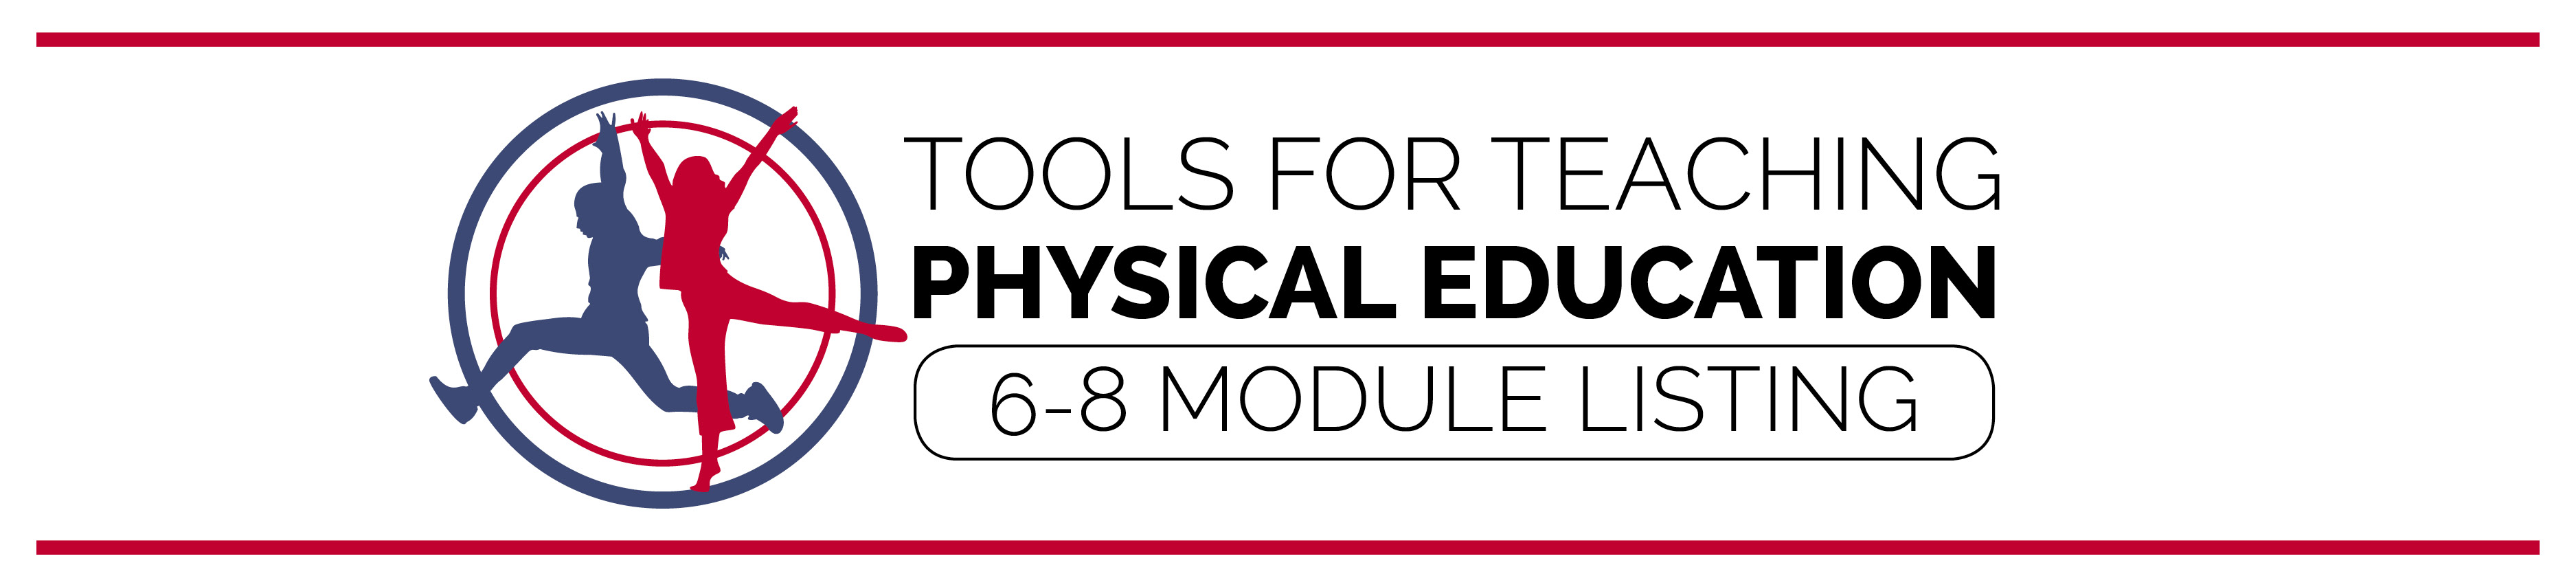 Middle School Physical Education Module Listing